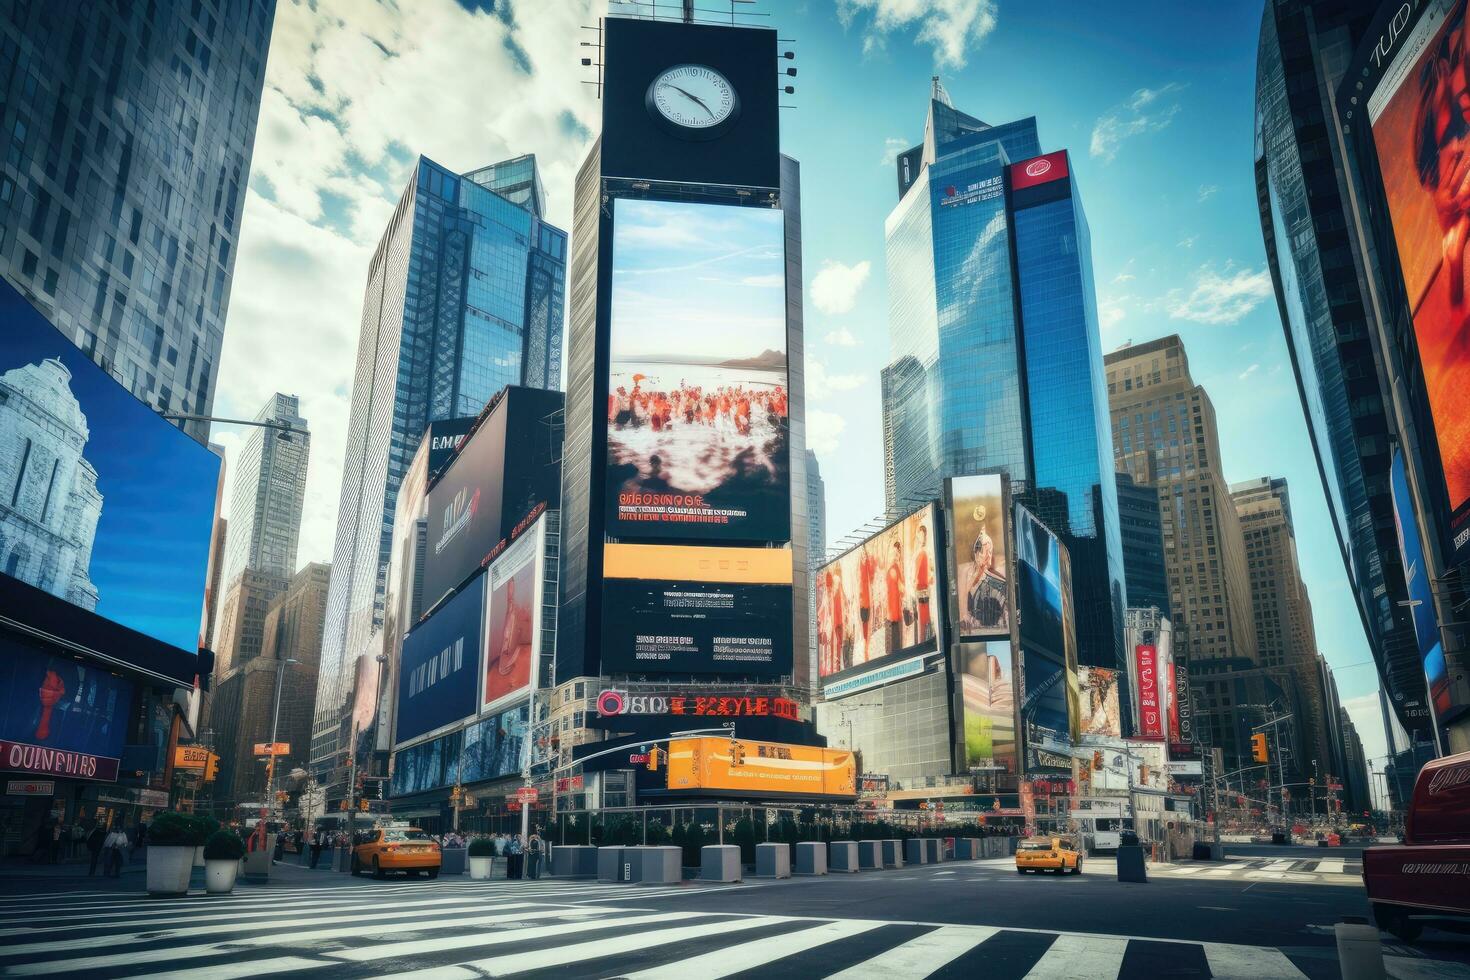 s Square, featured with Broadway Theaters and huge number of LED signs, is a symbol of New York City and the United States, Famous Times Square landmark in New York downtown, AI Generated photo